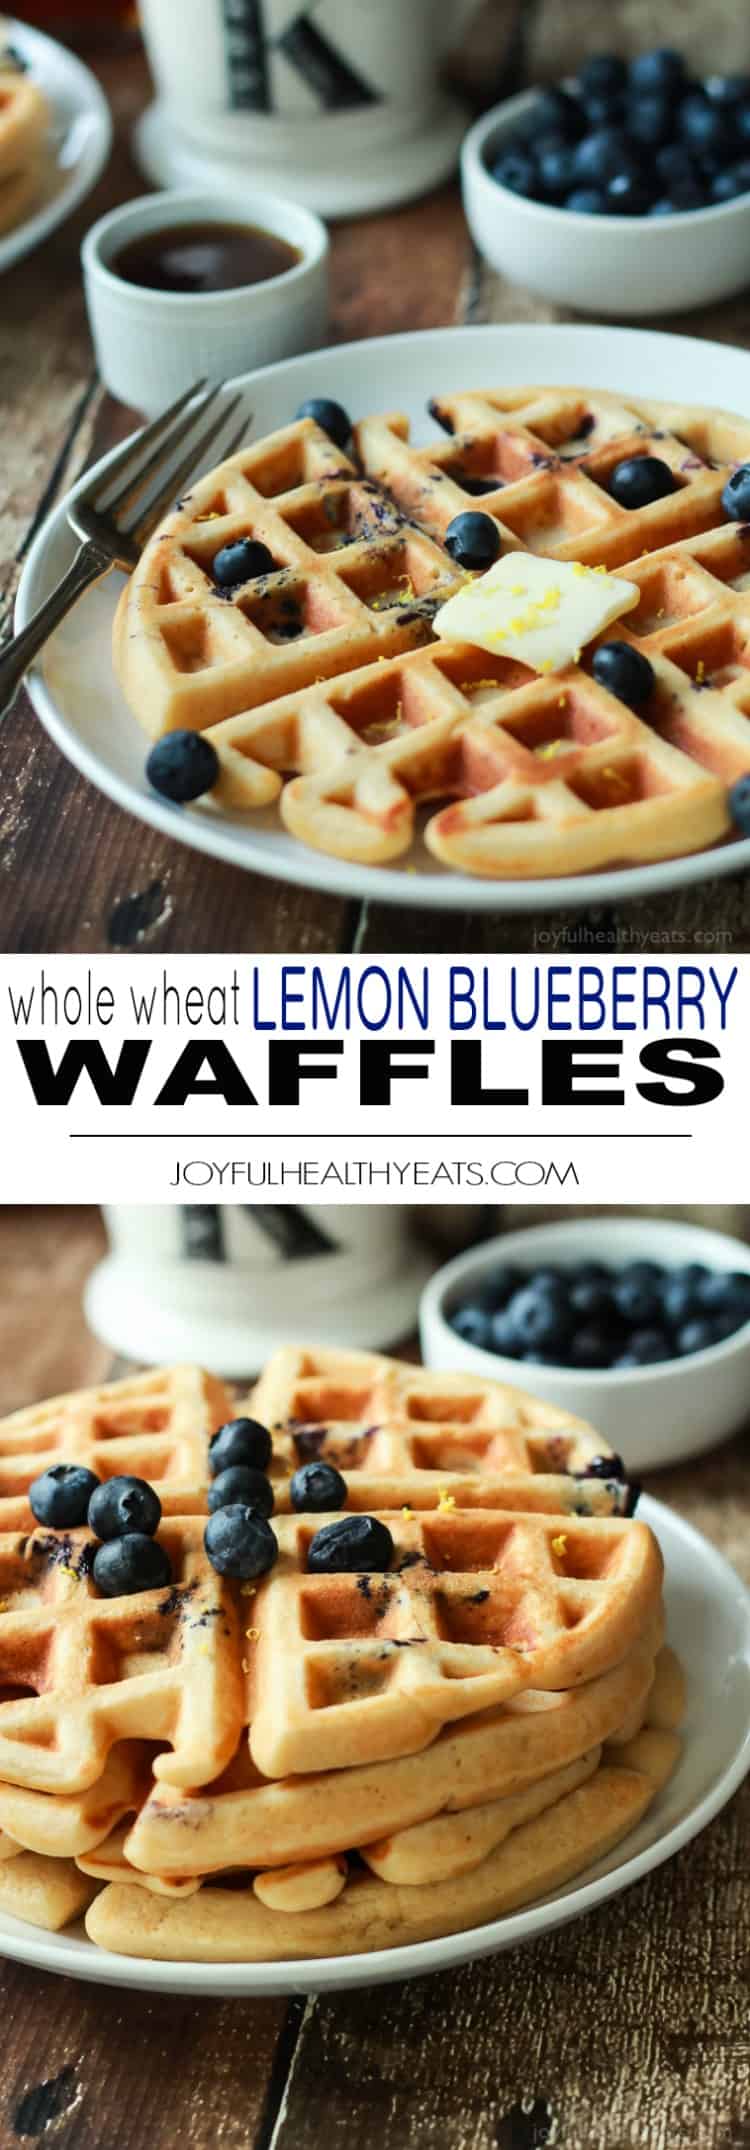 Whole Wheat Lemon Blueberry Waffles, these Waffles are packed with juicy blueberries and fresh lemon zest for the perfect light summer breakfast recipe! | joyfulhealthyeats.com #brunch #mothersday